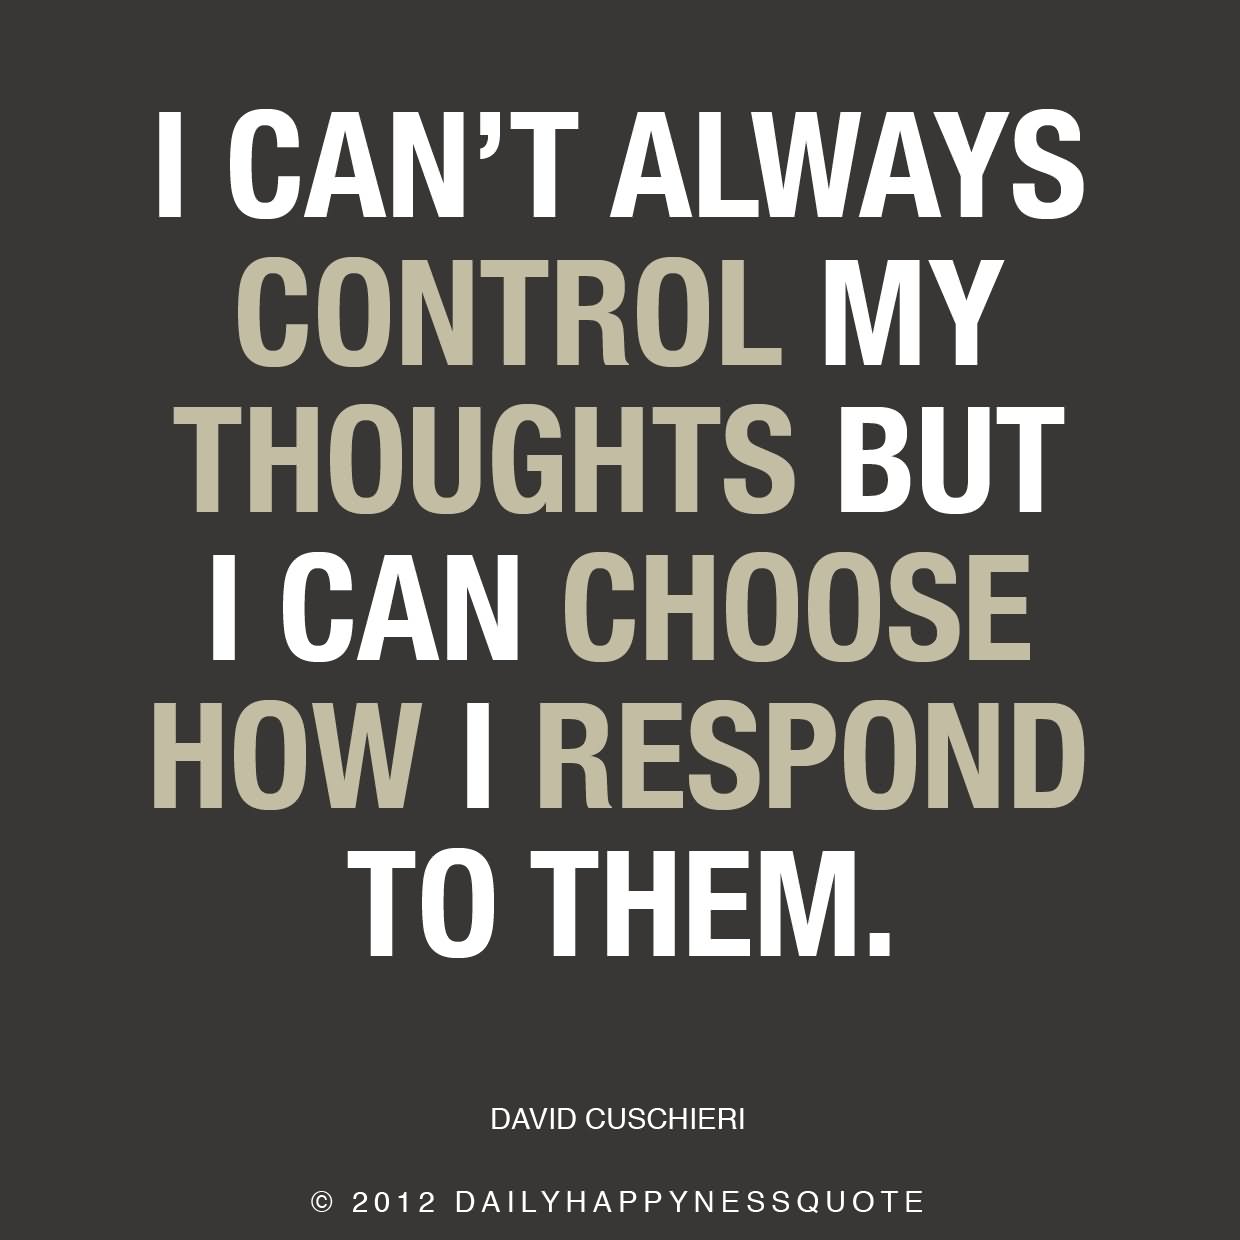 I can't always control my thoughts but I can choose how I respond to them. - David Cushieri